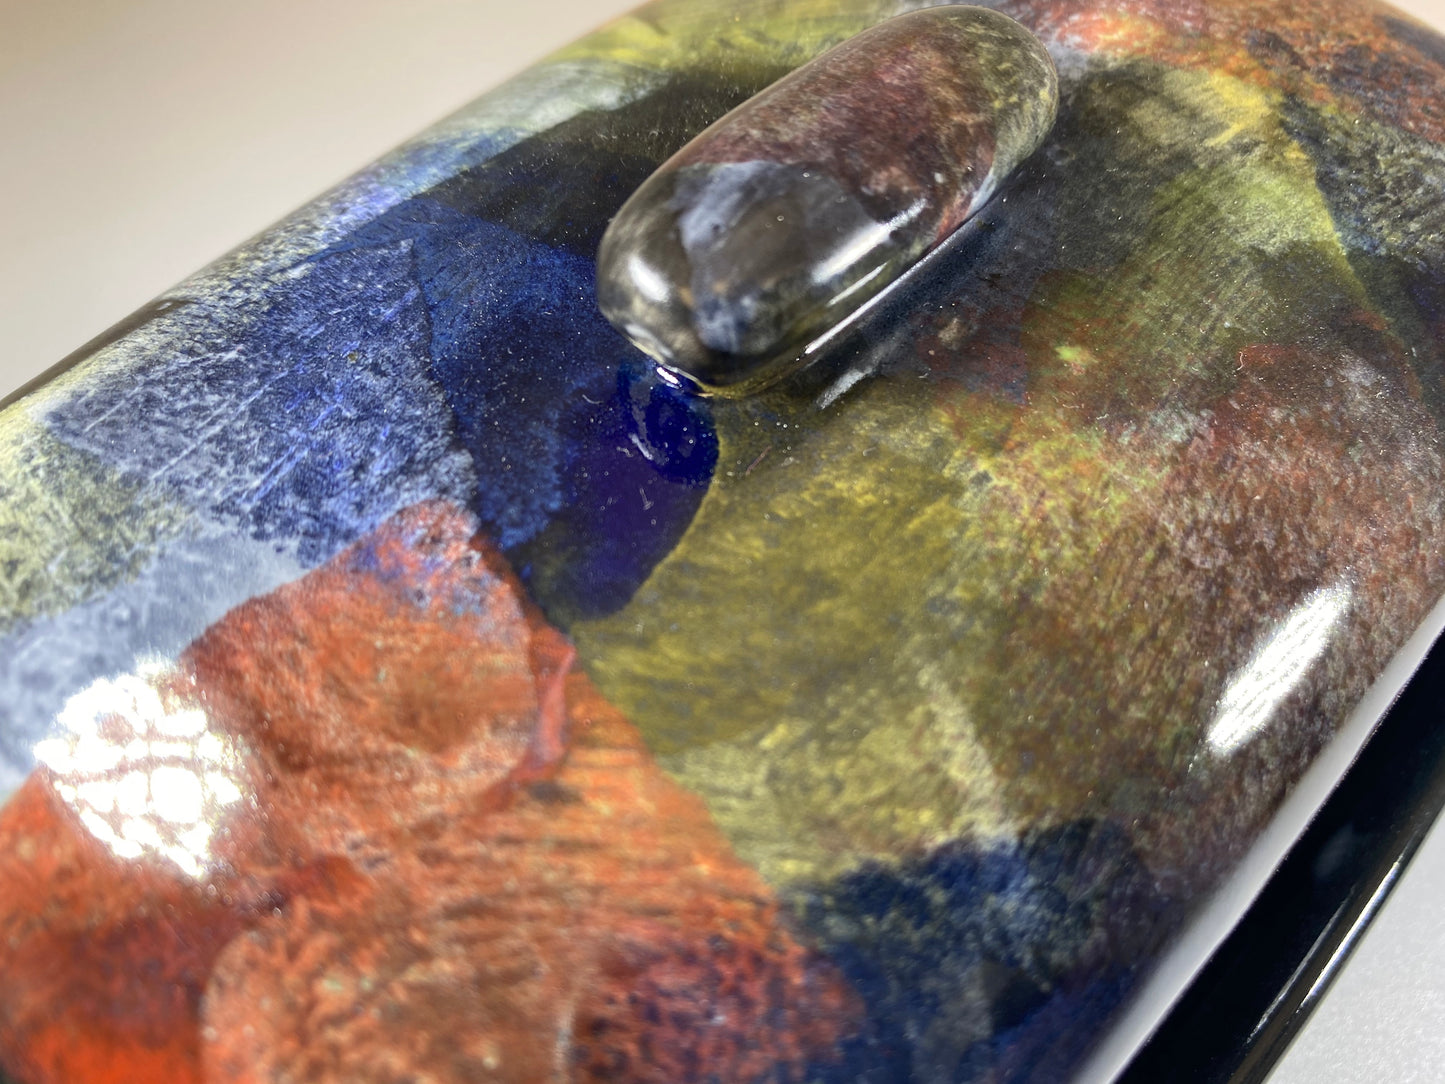 Butter Dish with Abstract Glaze Design - PeterBowenArt